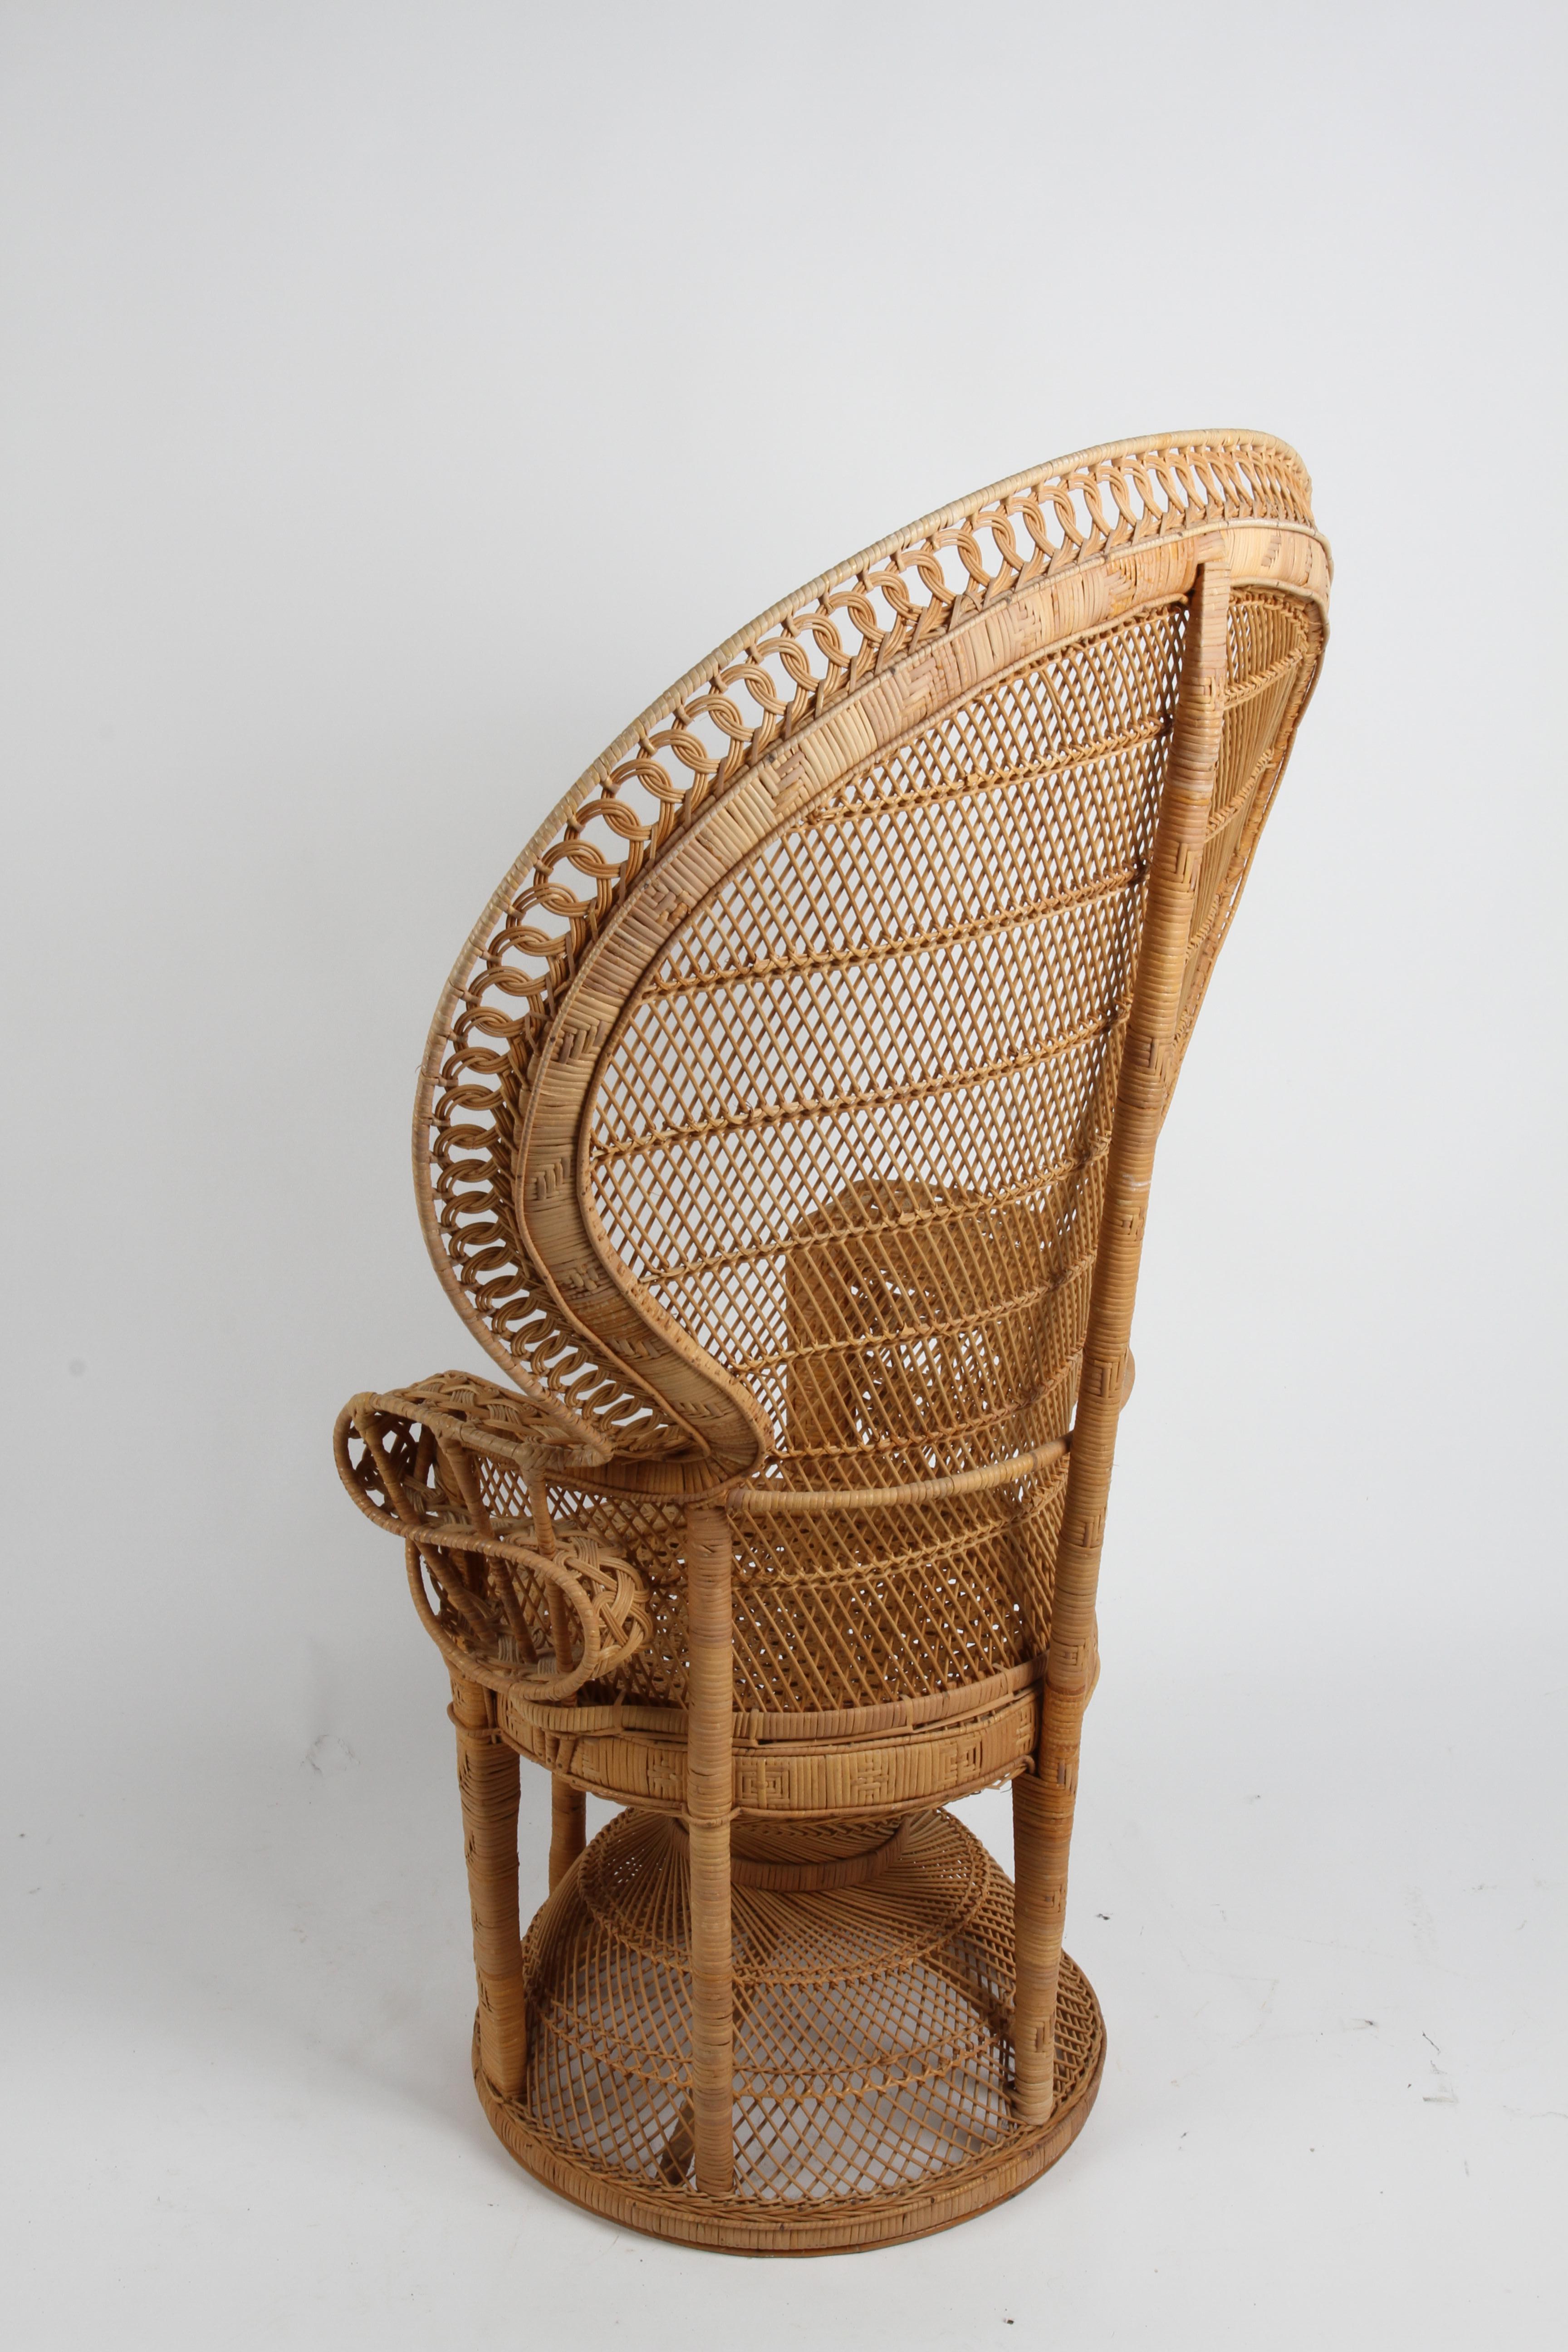 Vintage 1970s Rattan & Wicker Handcrafted Boho Chic Emmanuelle Peacock Chair 6